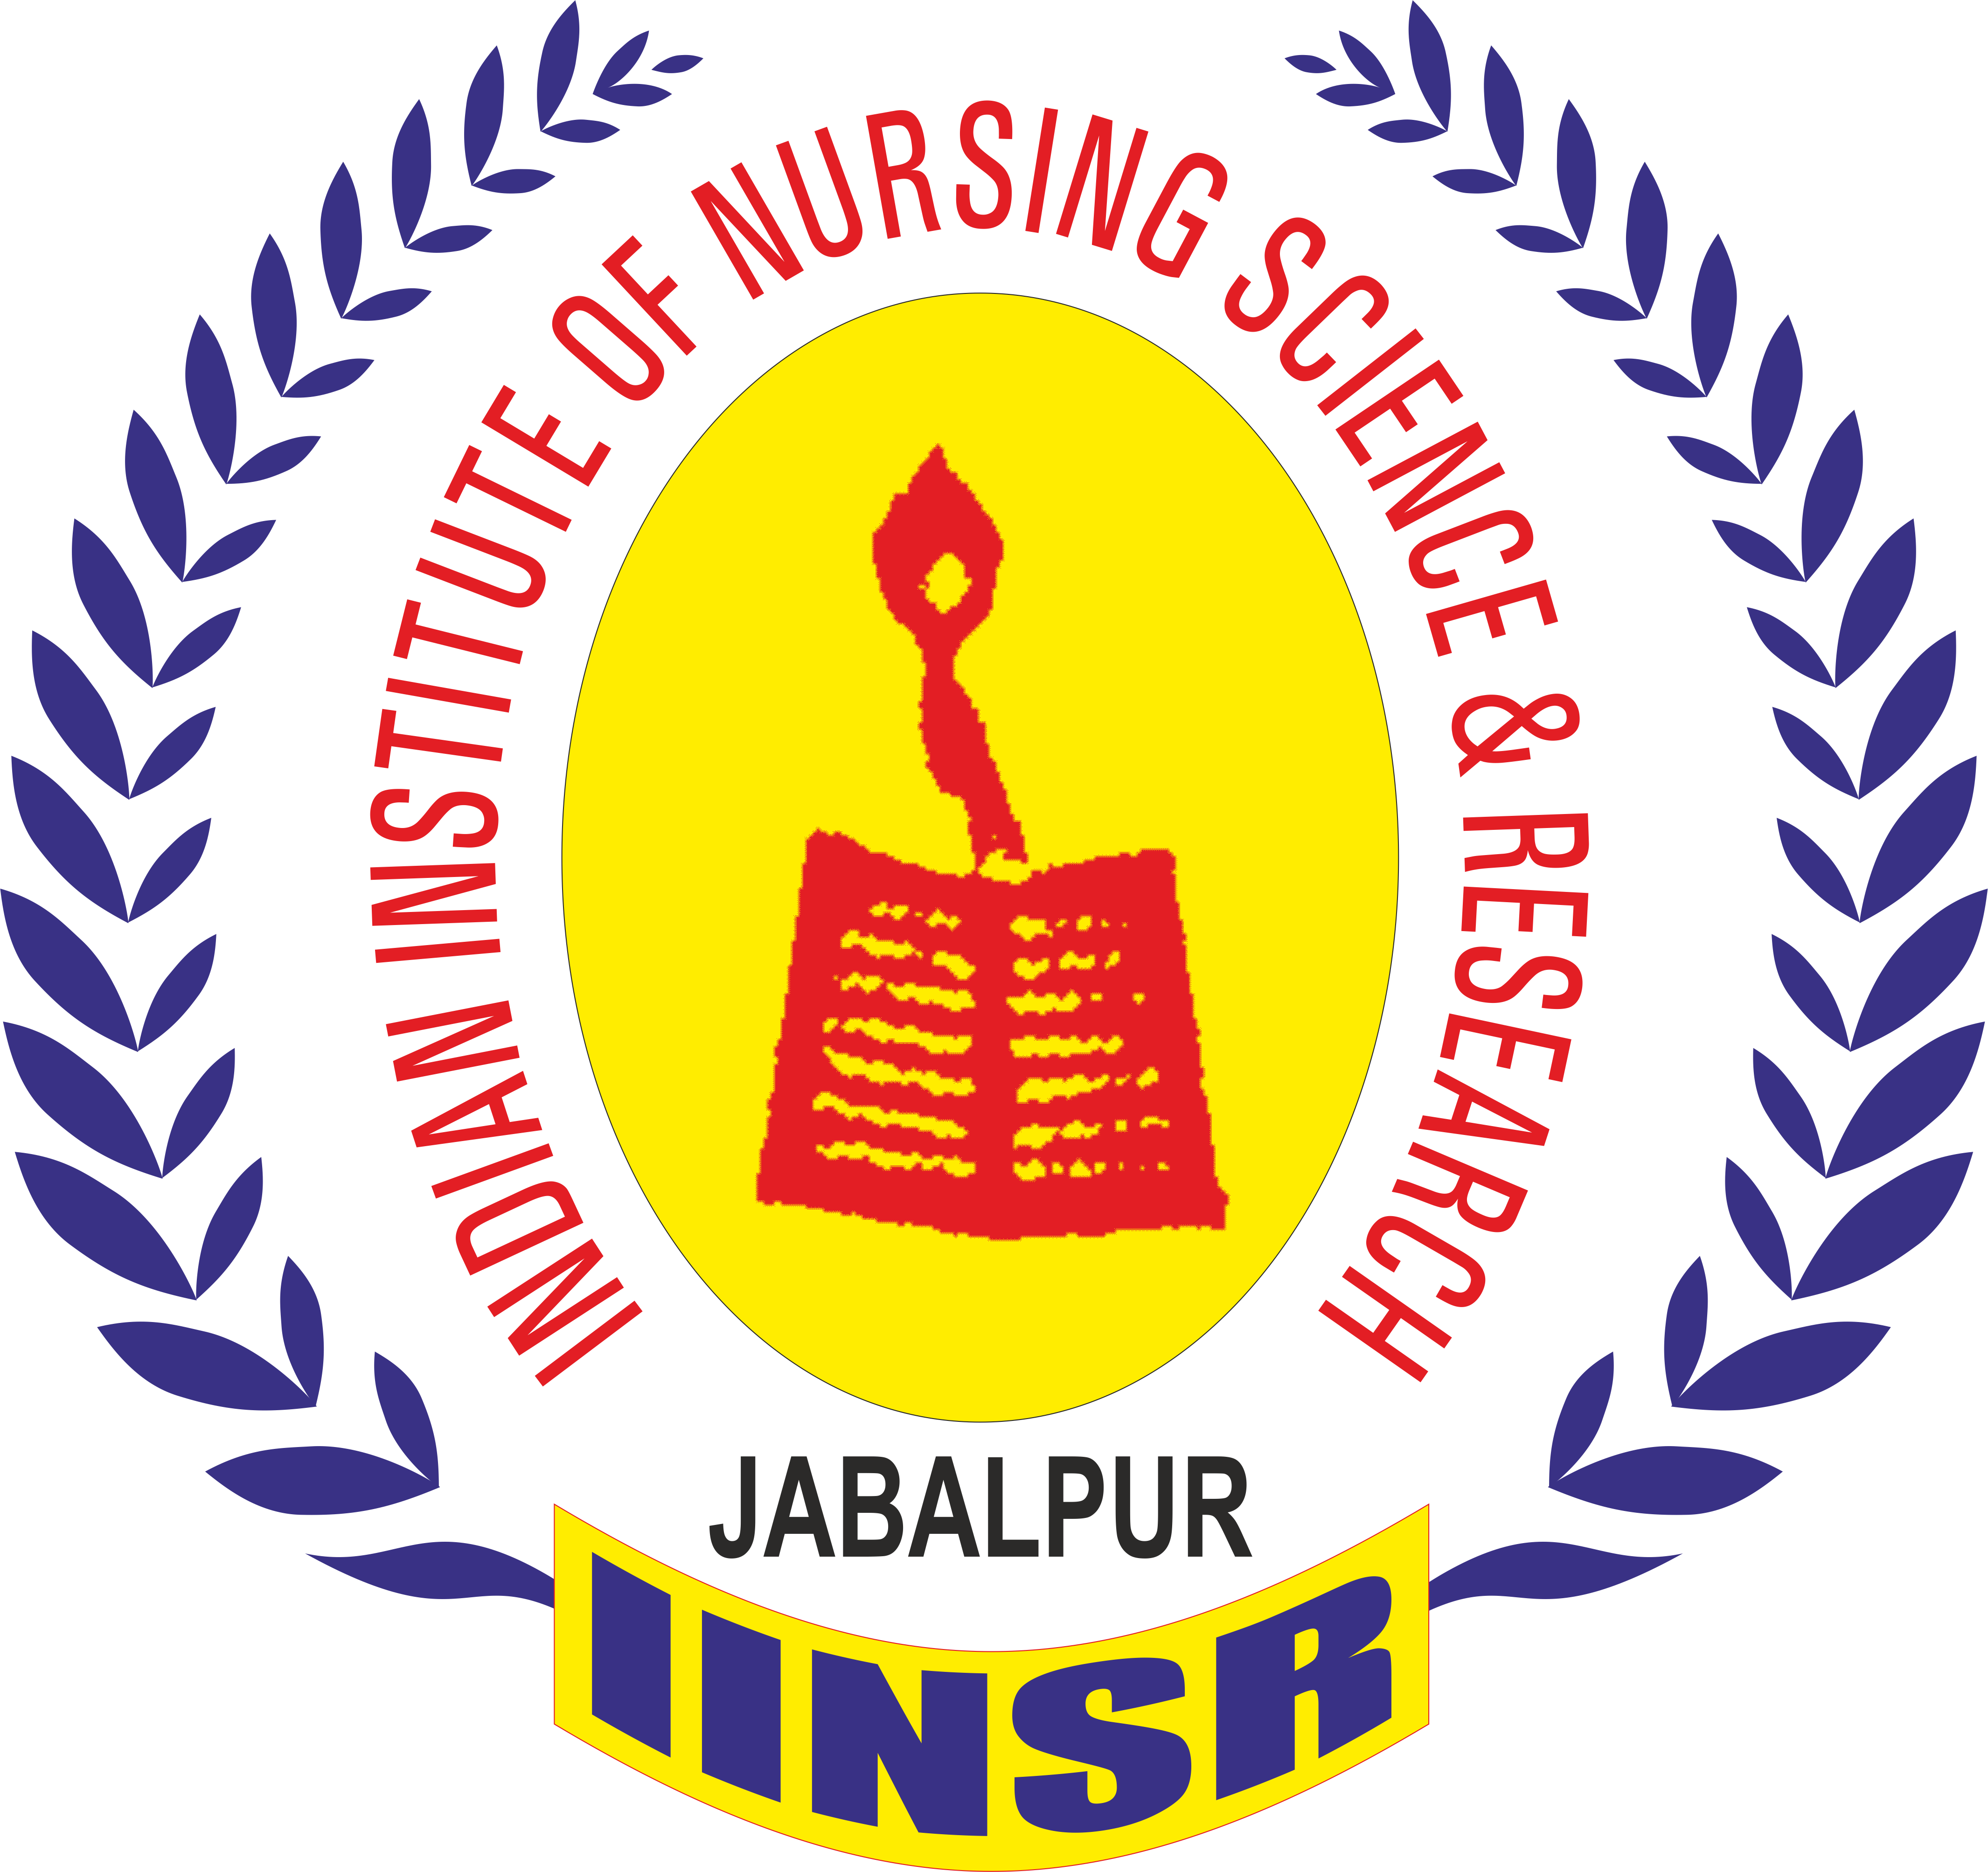 Indian Institute of Nursing Science and Research, Jabalpur